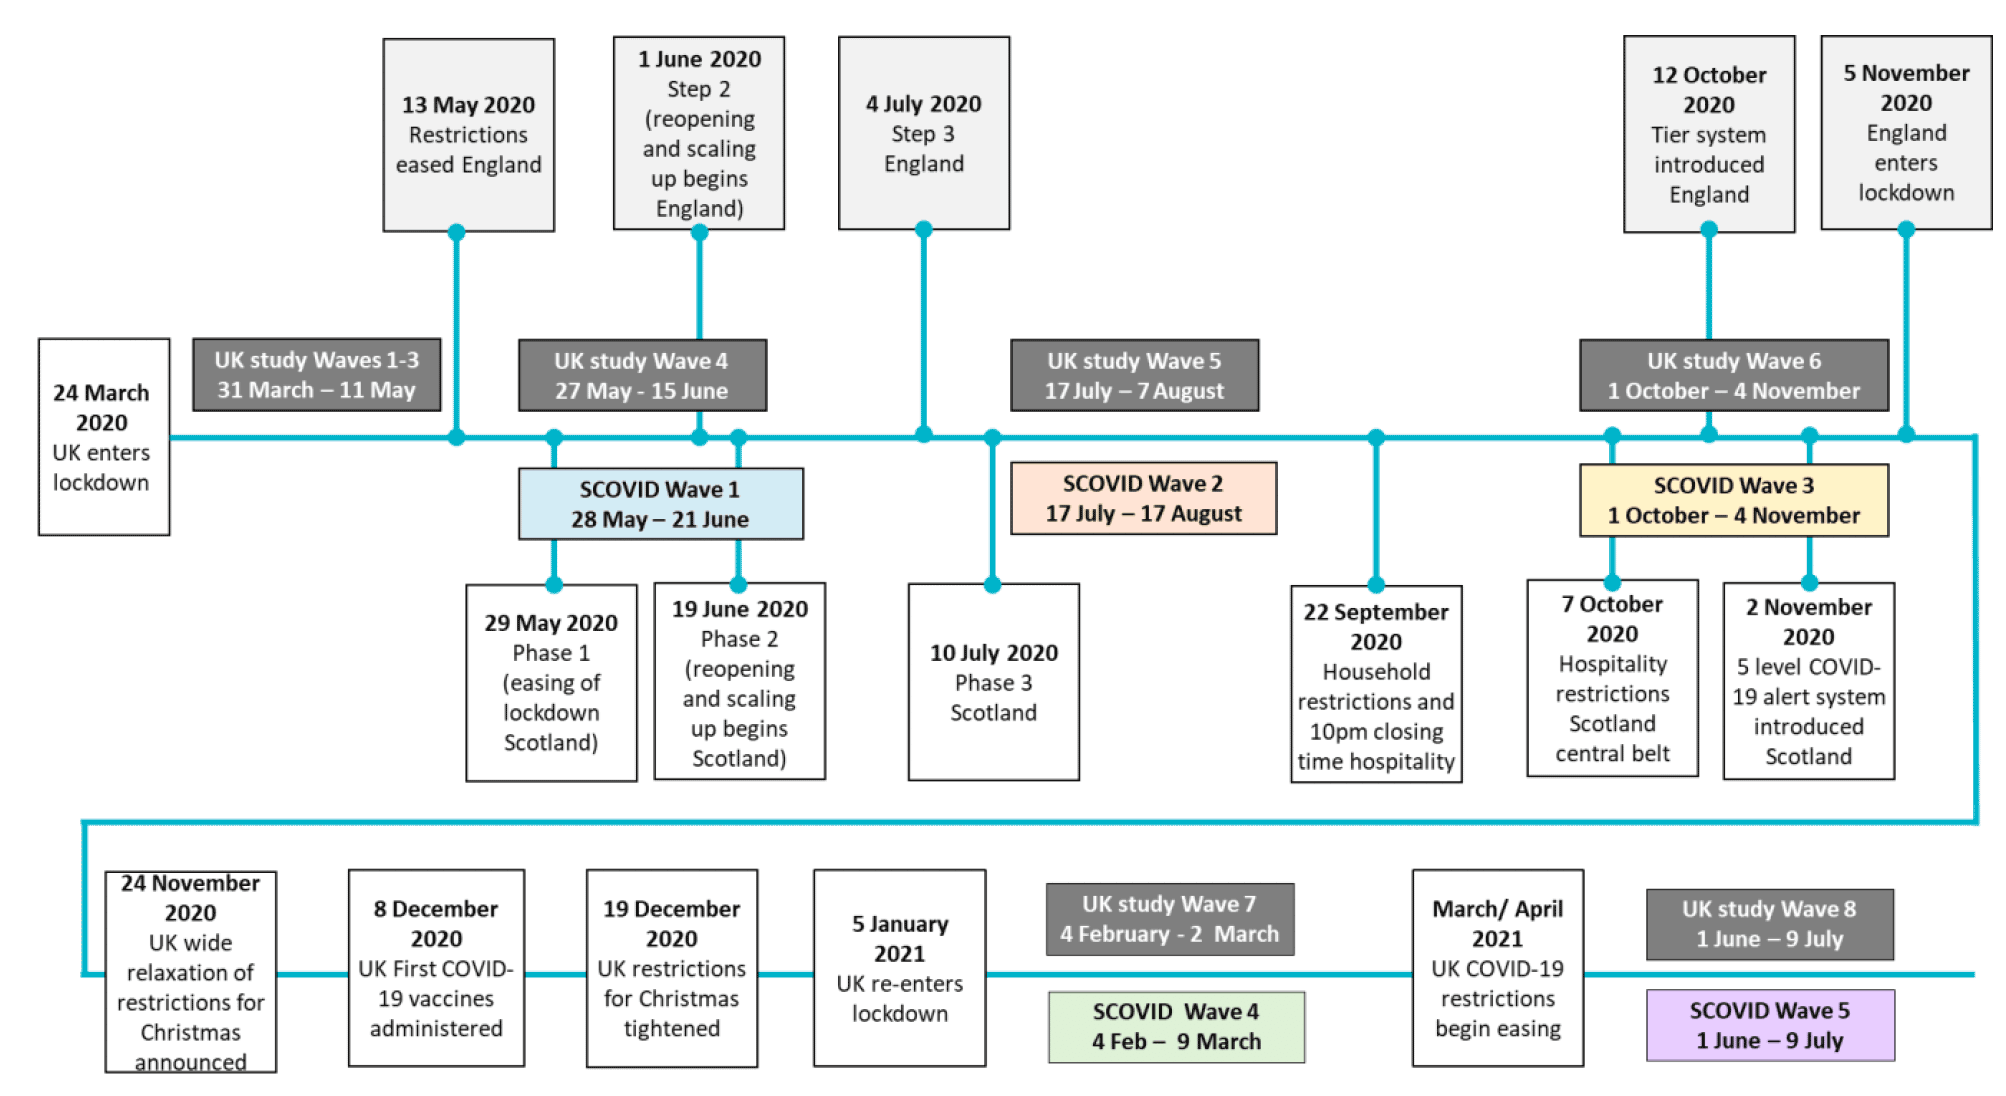 Figure 1.1. outlines the timeline of study recruitment for the COVID-19 Mental Health Tracker Studies. Following the announcement of the first UK lockdown the 24th of March 2020, three Mental Health Tracker study Waves were conducted on a UK level from 31st March until the 11th of May 2020. The first lockdown restrictions were eased in England the 13th of May 2020, with further restrictions being eased the 1st of June and the 4th of July. This differed slightly from the timeline in Scotland, where the first lockdown restrictions were eased the 29th of May, 16 days later than in England, followed by further easing measures the 19th of June and the 10th of July. The UK Wave 4 recruitment started the 27th of May and lasted until the 15th of June 2020. The first wave of SCOVID participants was recruited from the 28th of May until the 21st of June 2020. The following month, recruitment started for the Wave 2 SCOVID Mental Health Tracker study, which lasted from 17th of July until the 17th of August 2020. The UK Wave 5 recruitment started the same day, the 17th of July, and lasted until the 7th of August. On 22nd of September, household restrictions were reintroduced in Scotland, which also included hospitality having to close at 10 pm. Both the UK Wave 6 and the SCOVID Wave 3 data collection lasted from 1st of October until the 4th of November 2020. On October 7th, hospitality in the Scottish central belt was further restricted and five days later, on October 12th, a new tier system was introduced in England. Two days before the SCOVID Wave 3 survey closed, Scotland introduced a five level COVID-19 alert system. On 5th of November 2020, England entered lockdown again. 
On November 24th it was announced that restrictions will be eased UK-wide for the Christmas period. The first COVID-19 vaccine in the UK was administered on 8th December. However, on December 19th it was announced that UK restrictions will be tightened for Christmas and on January 5th 2021, the UK re-entered lockdown. Both the UK study Wave 7 as well as the SCOVID Wave 4 recruitment started on February 4th. While the UK study recruitment lasted until March 2nd, the SCOVID Wave 4 recruitment finished on March 9th. The easing of UK COVID-19 restrictions began in March/April. Both the UK study Wave 8 and the SCOVID Wave 5 study recruited participants from May 28th until July 7th 2021.
